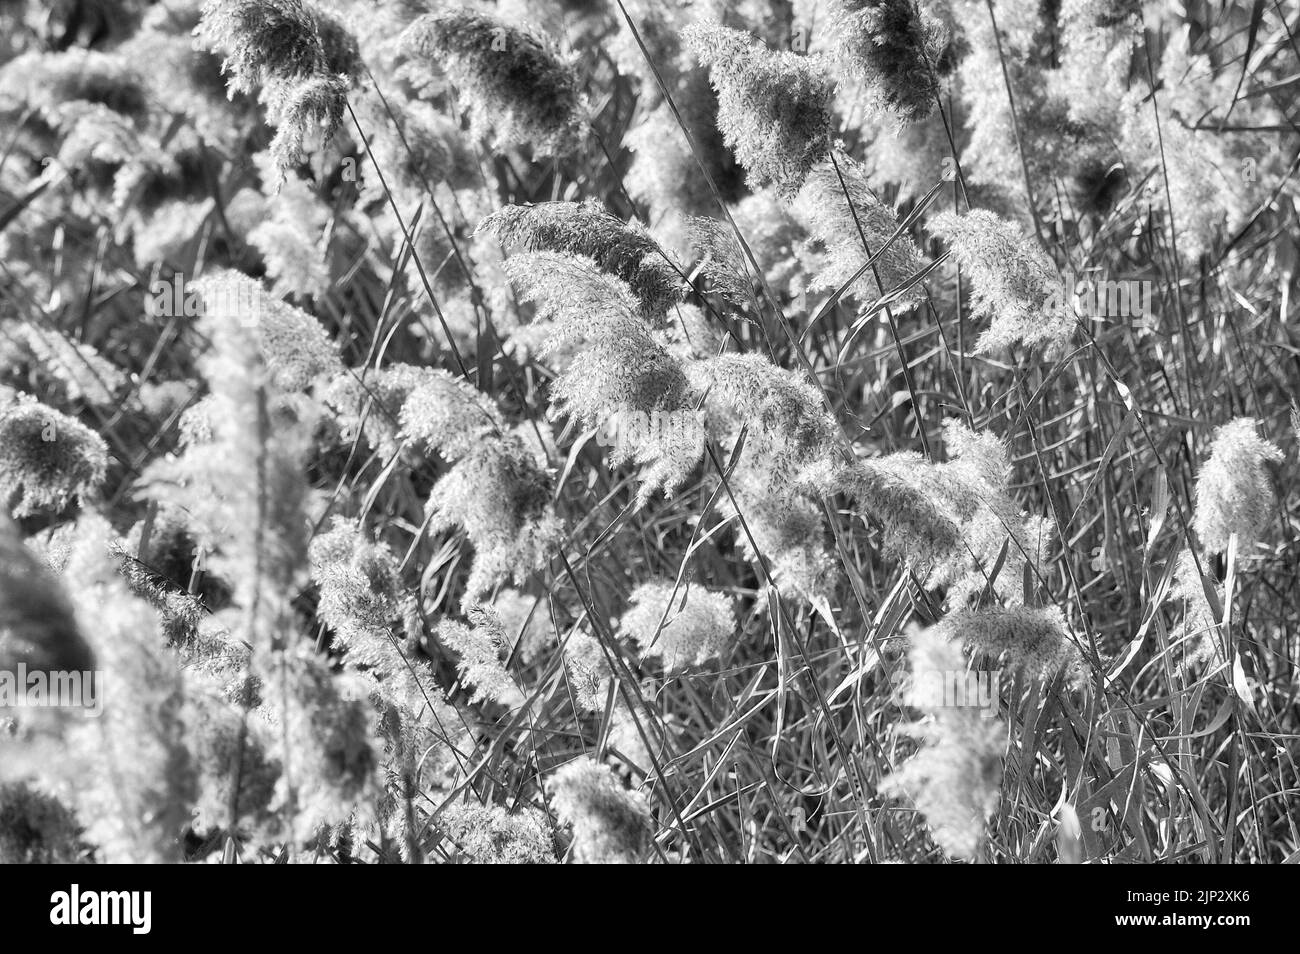 A grayscale of breezy reeds in Zamora, Spain Stock Photo